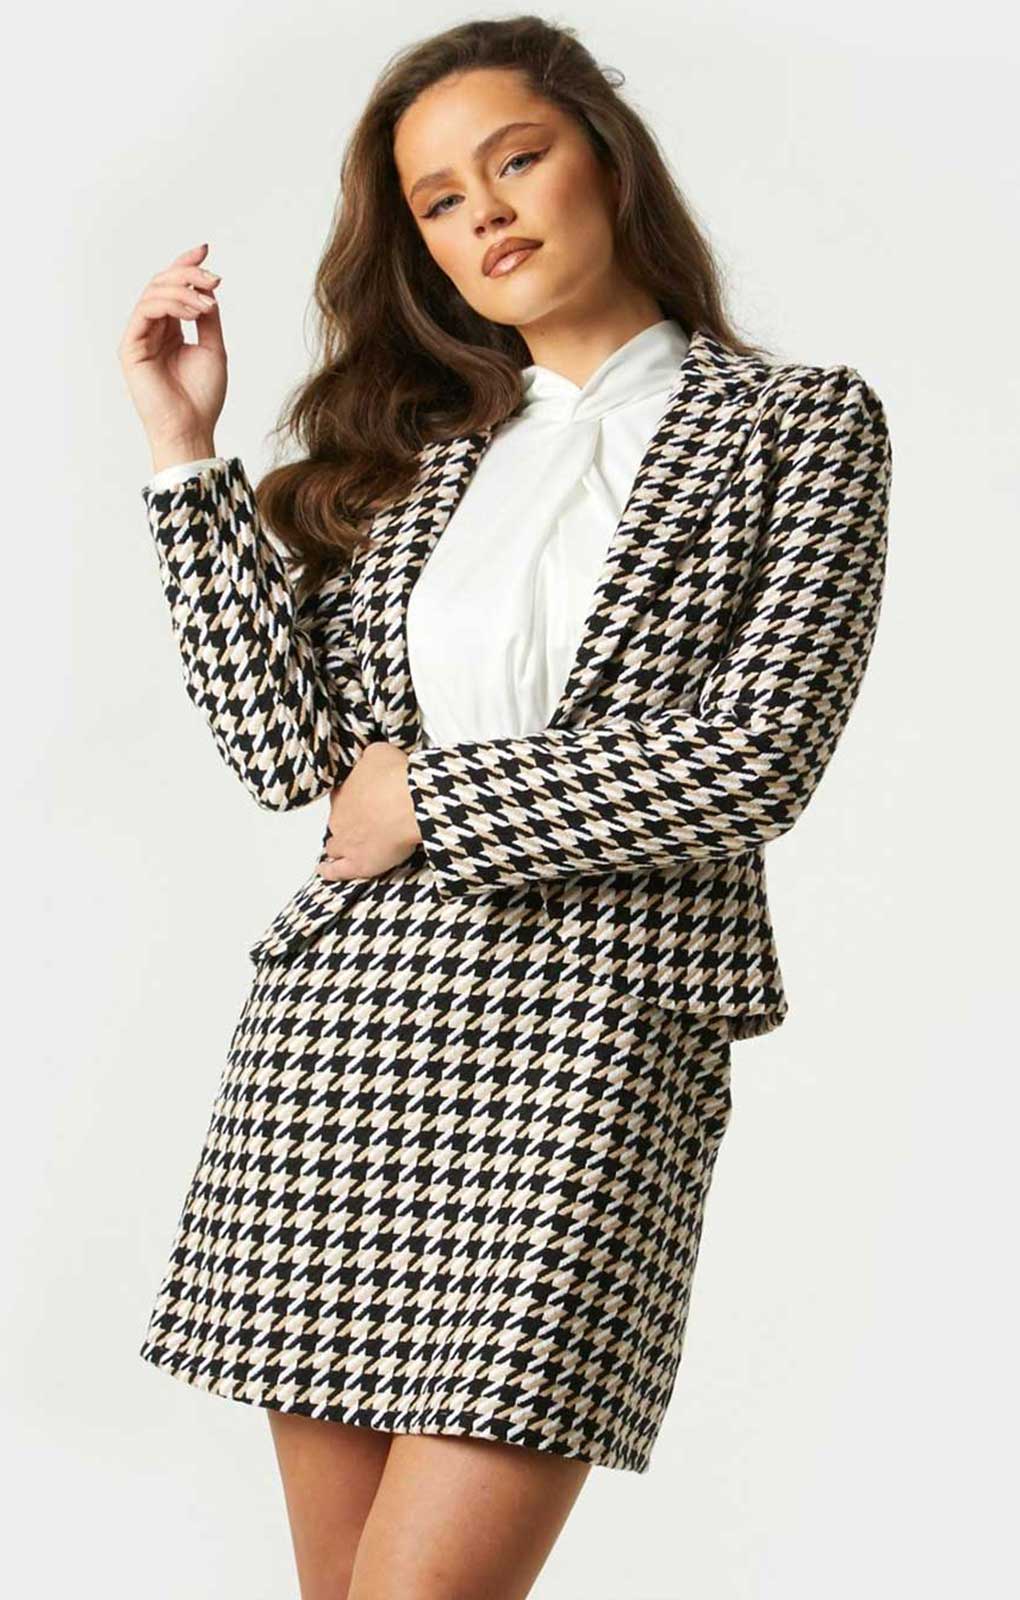 Little Mistress Keirah Houndstooth Fitted Blazer product image